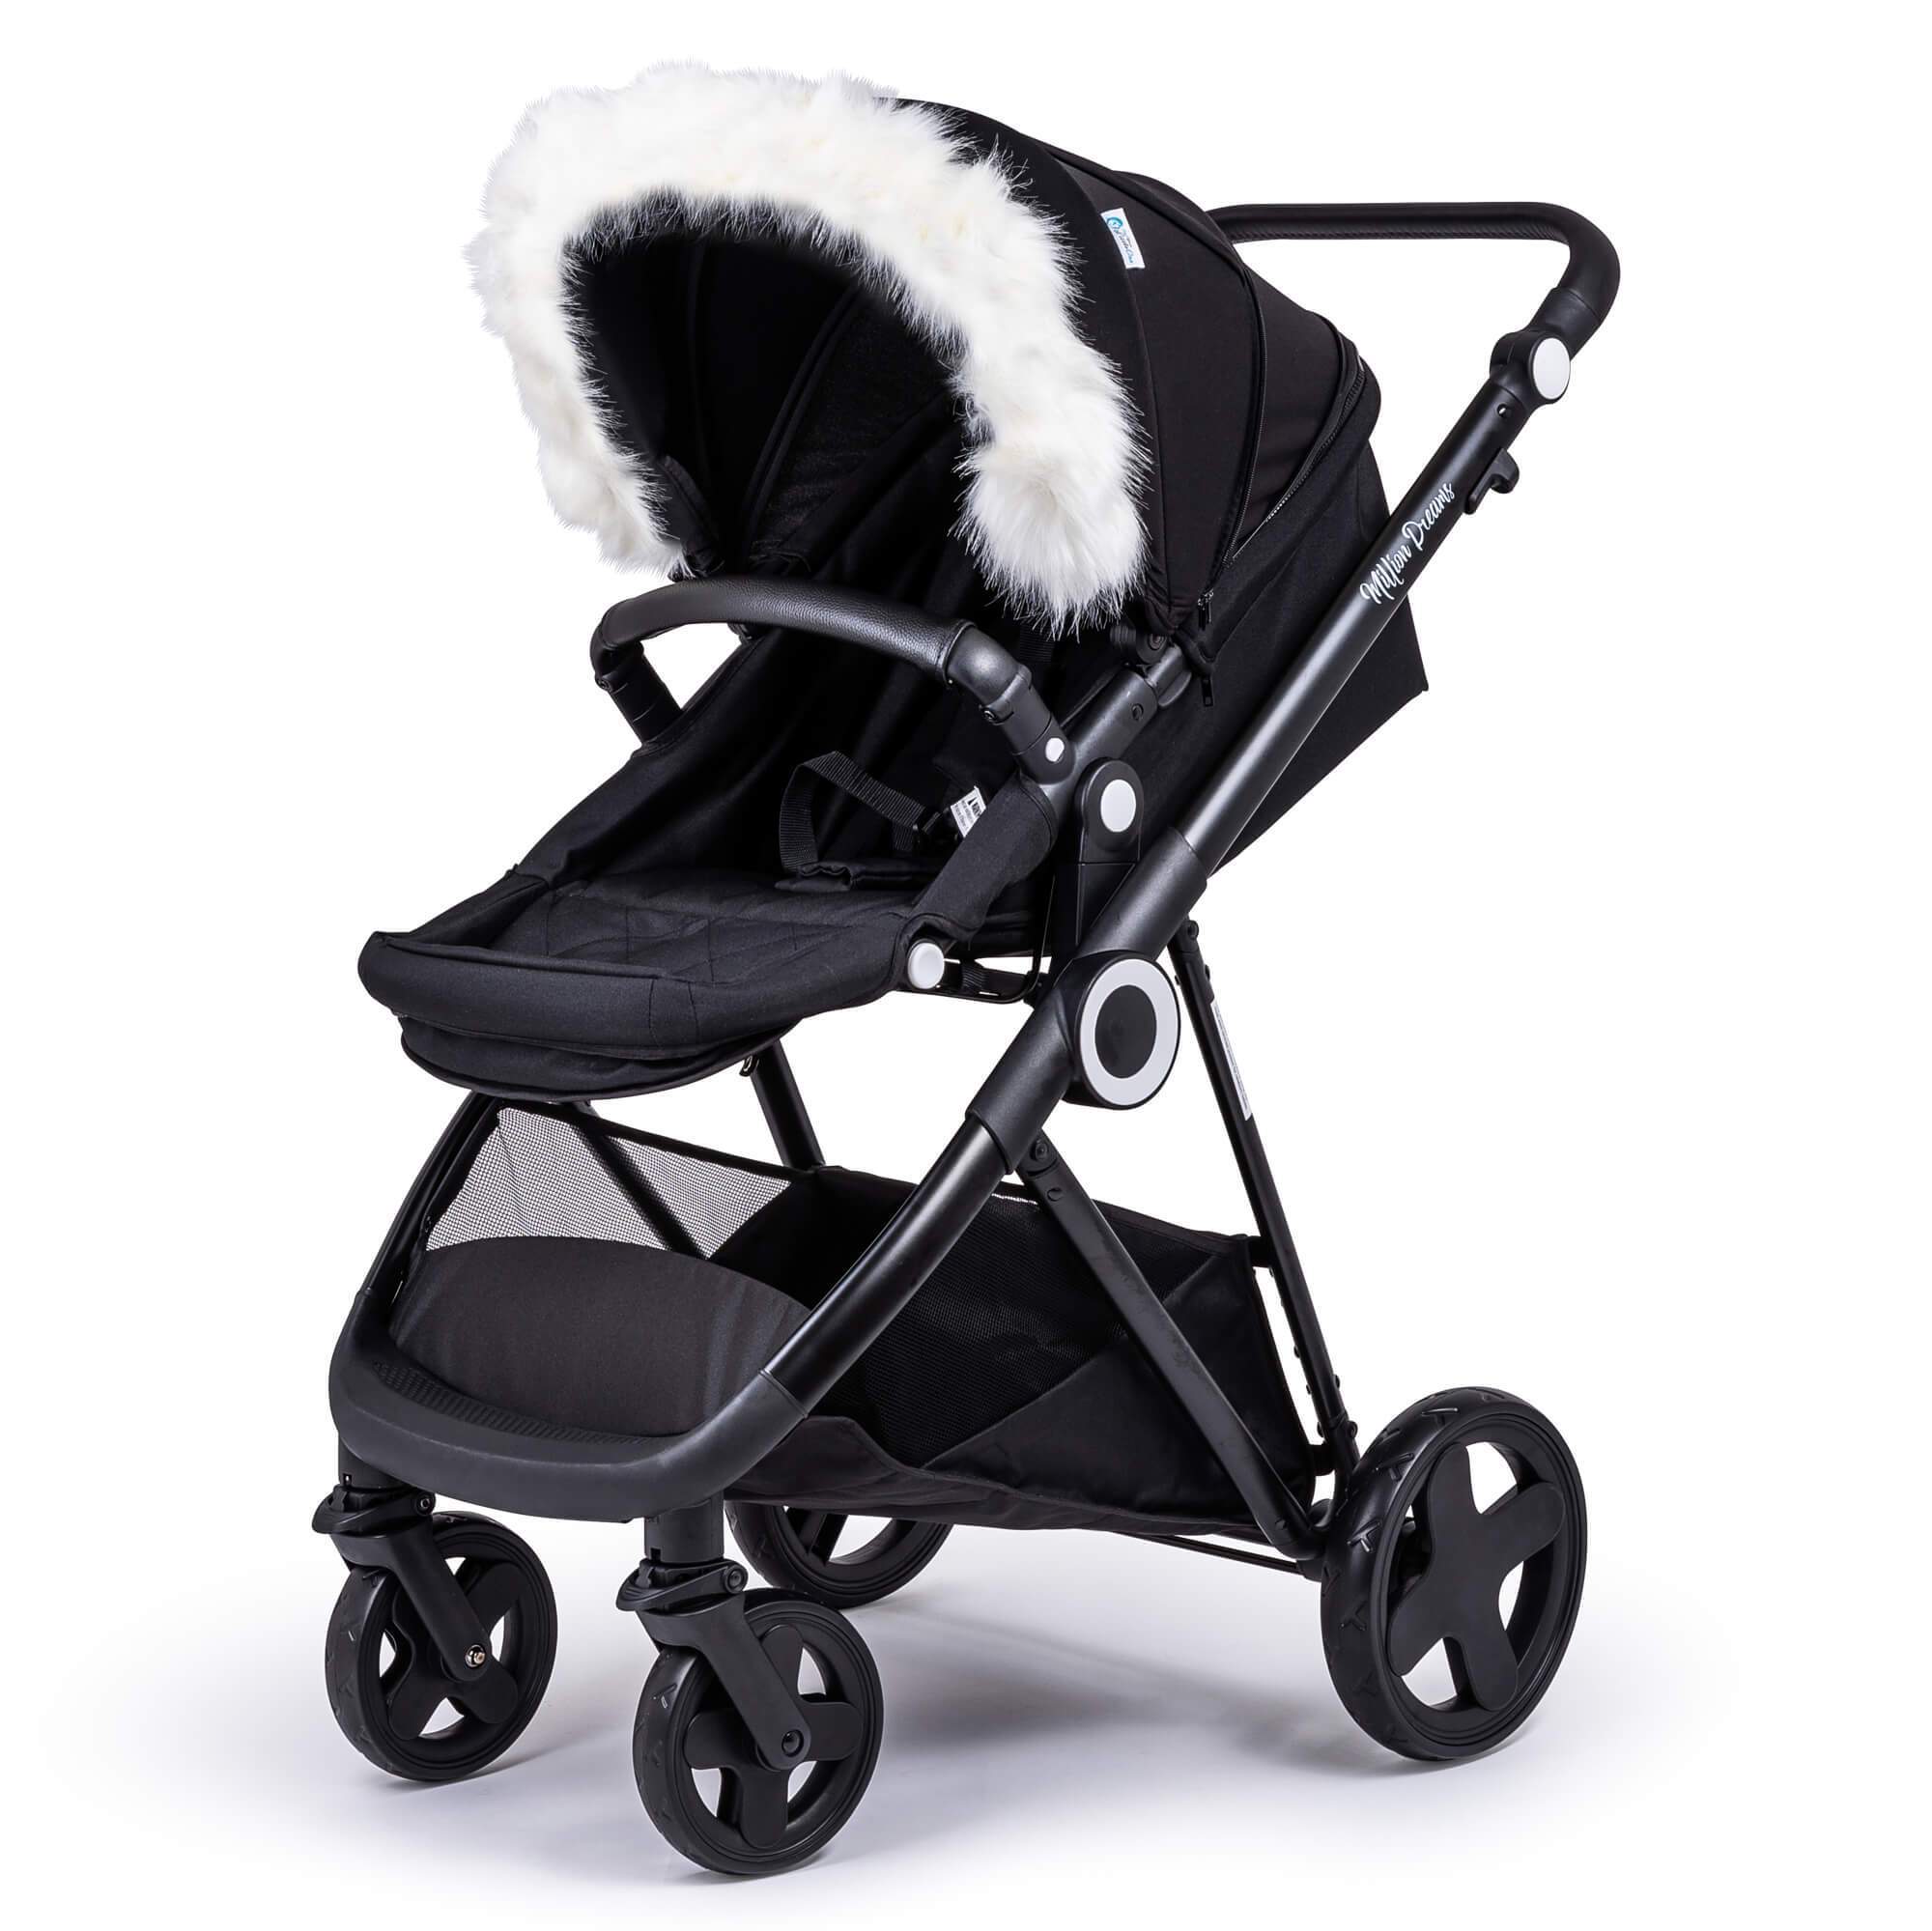 Pram Fur Hood Trim Attachment for Pushchair Compatible with Joolz - White / Fits All Models | For Your Little One